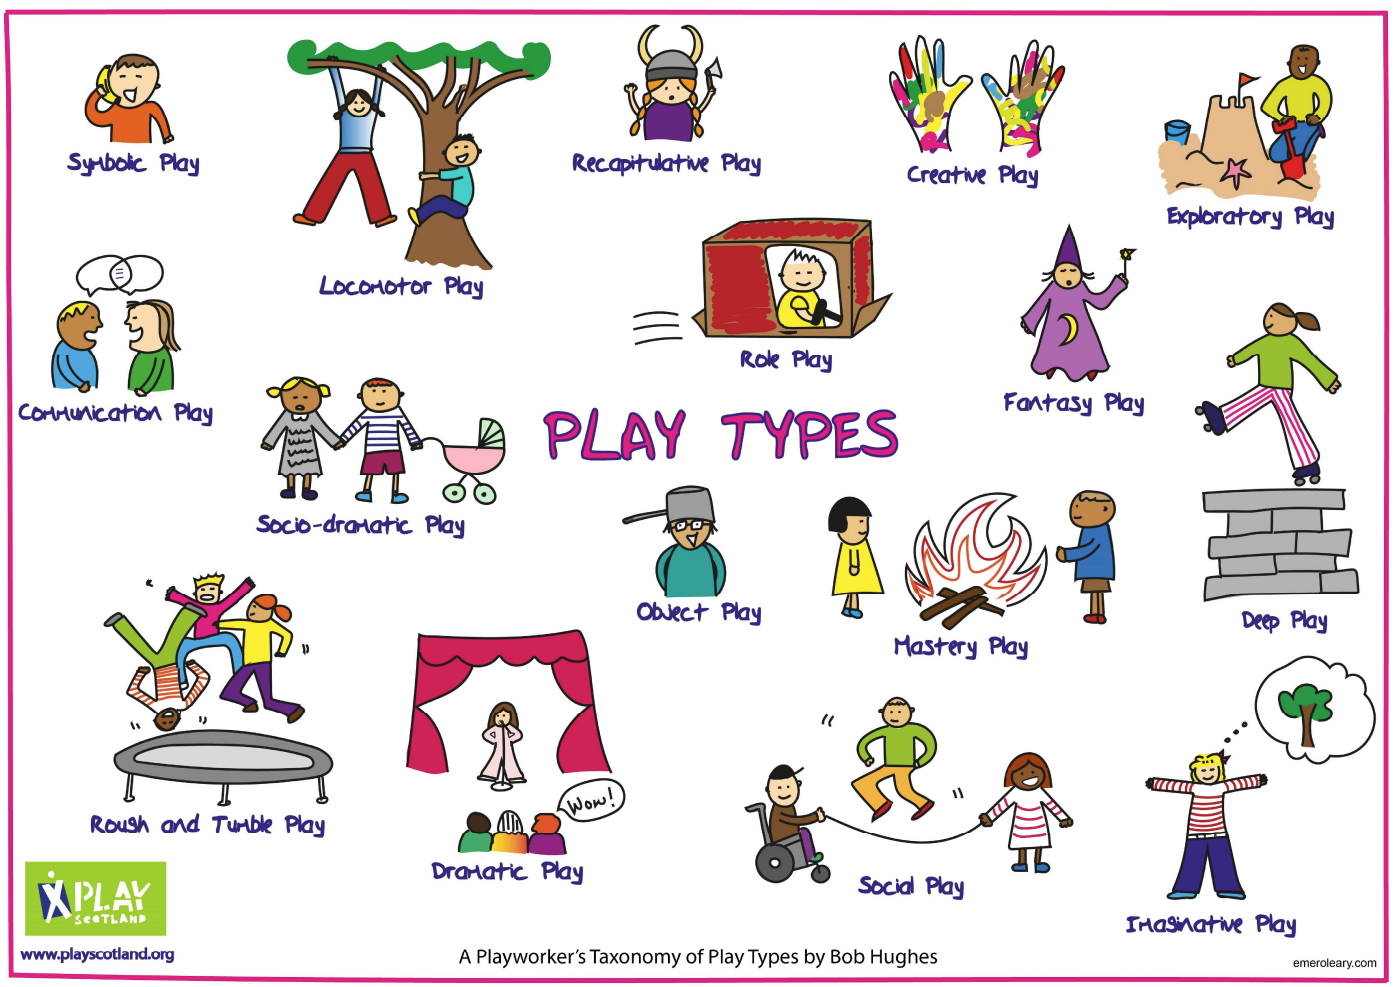 Play types poster